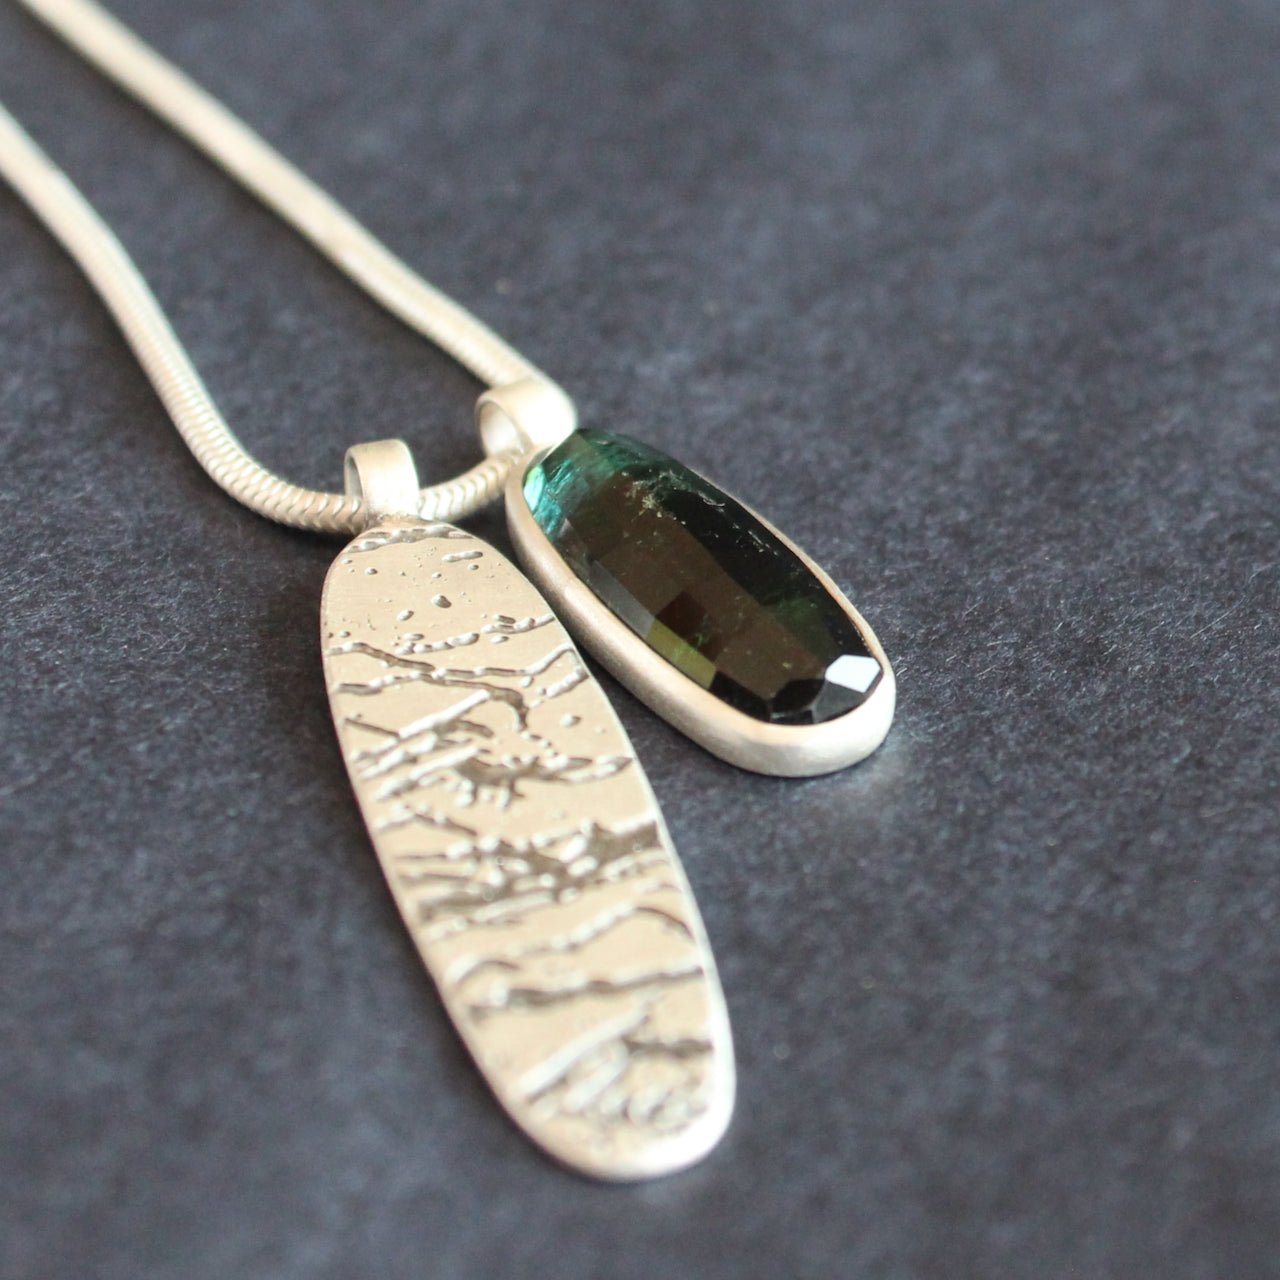 double pendant on silver chain of blue green stone and oval shaped silver disc by Cornwall jeweller Carin Lindberg 